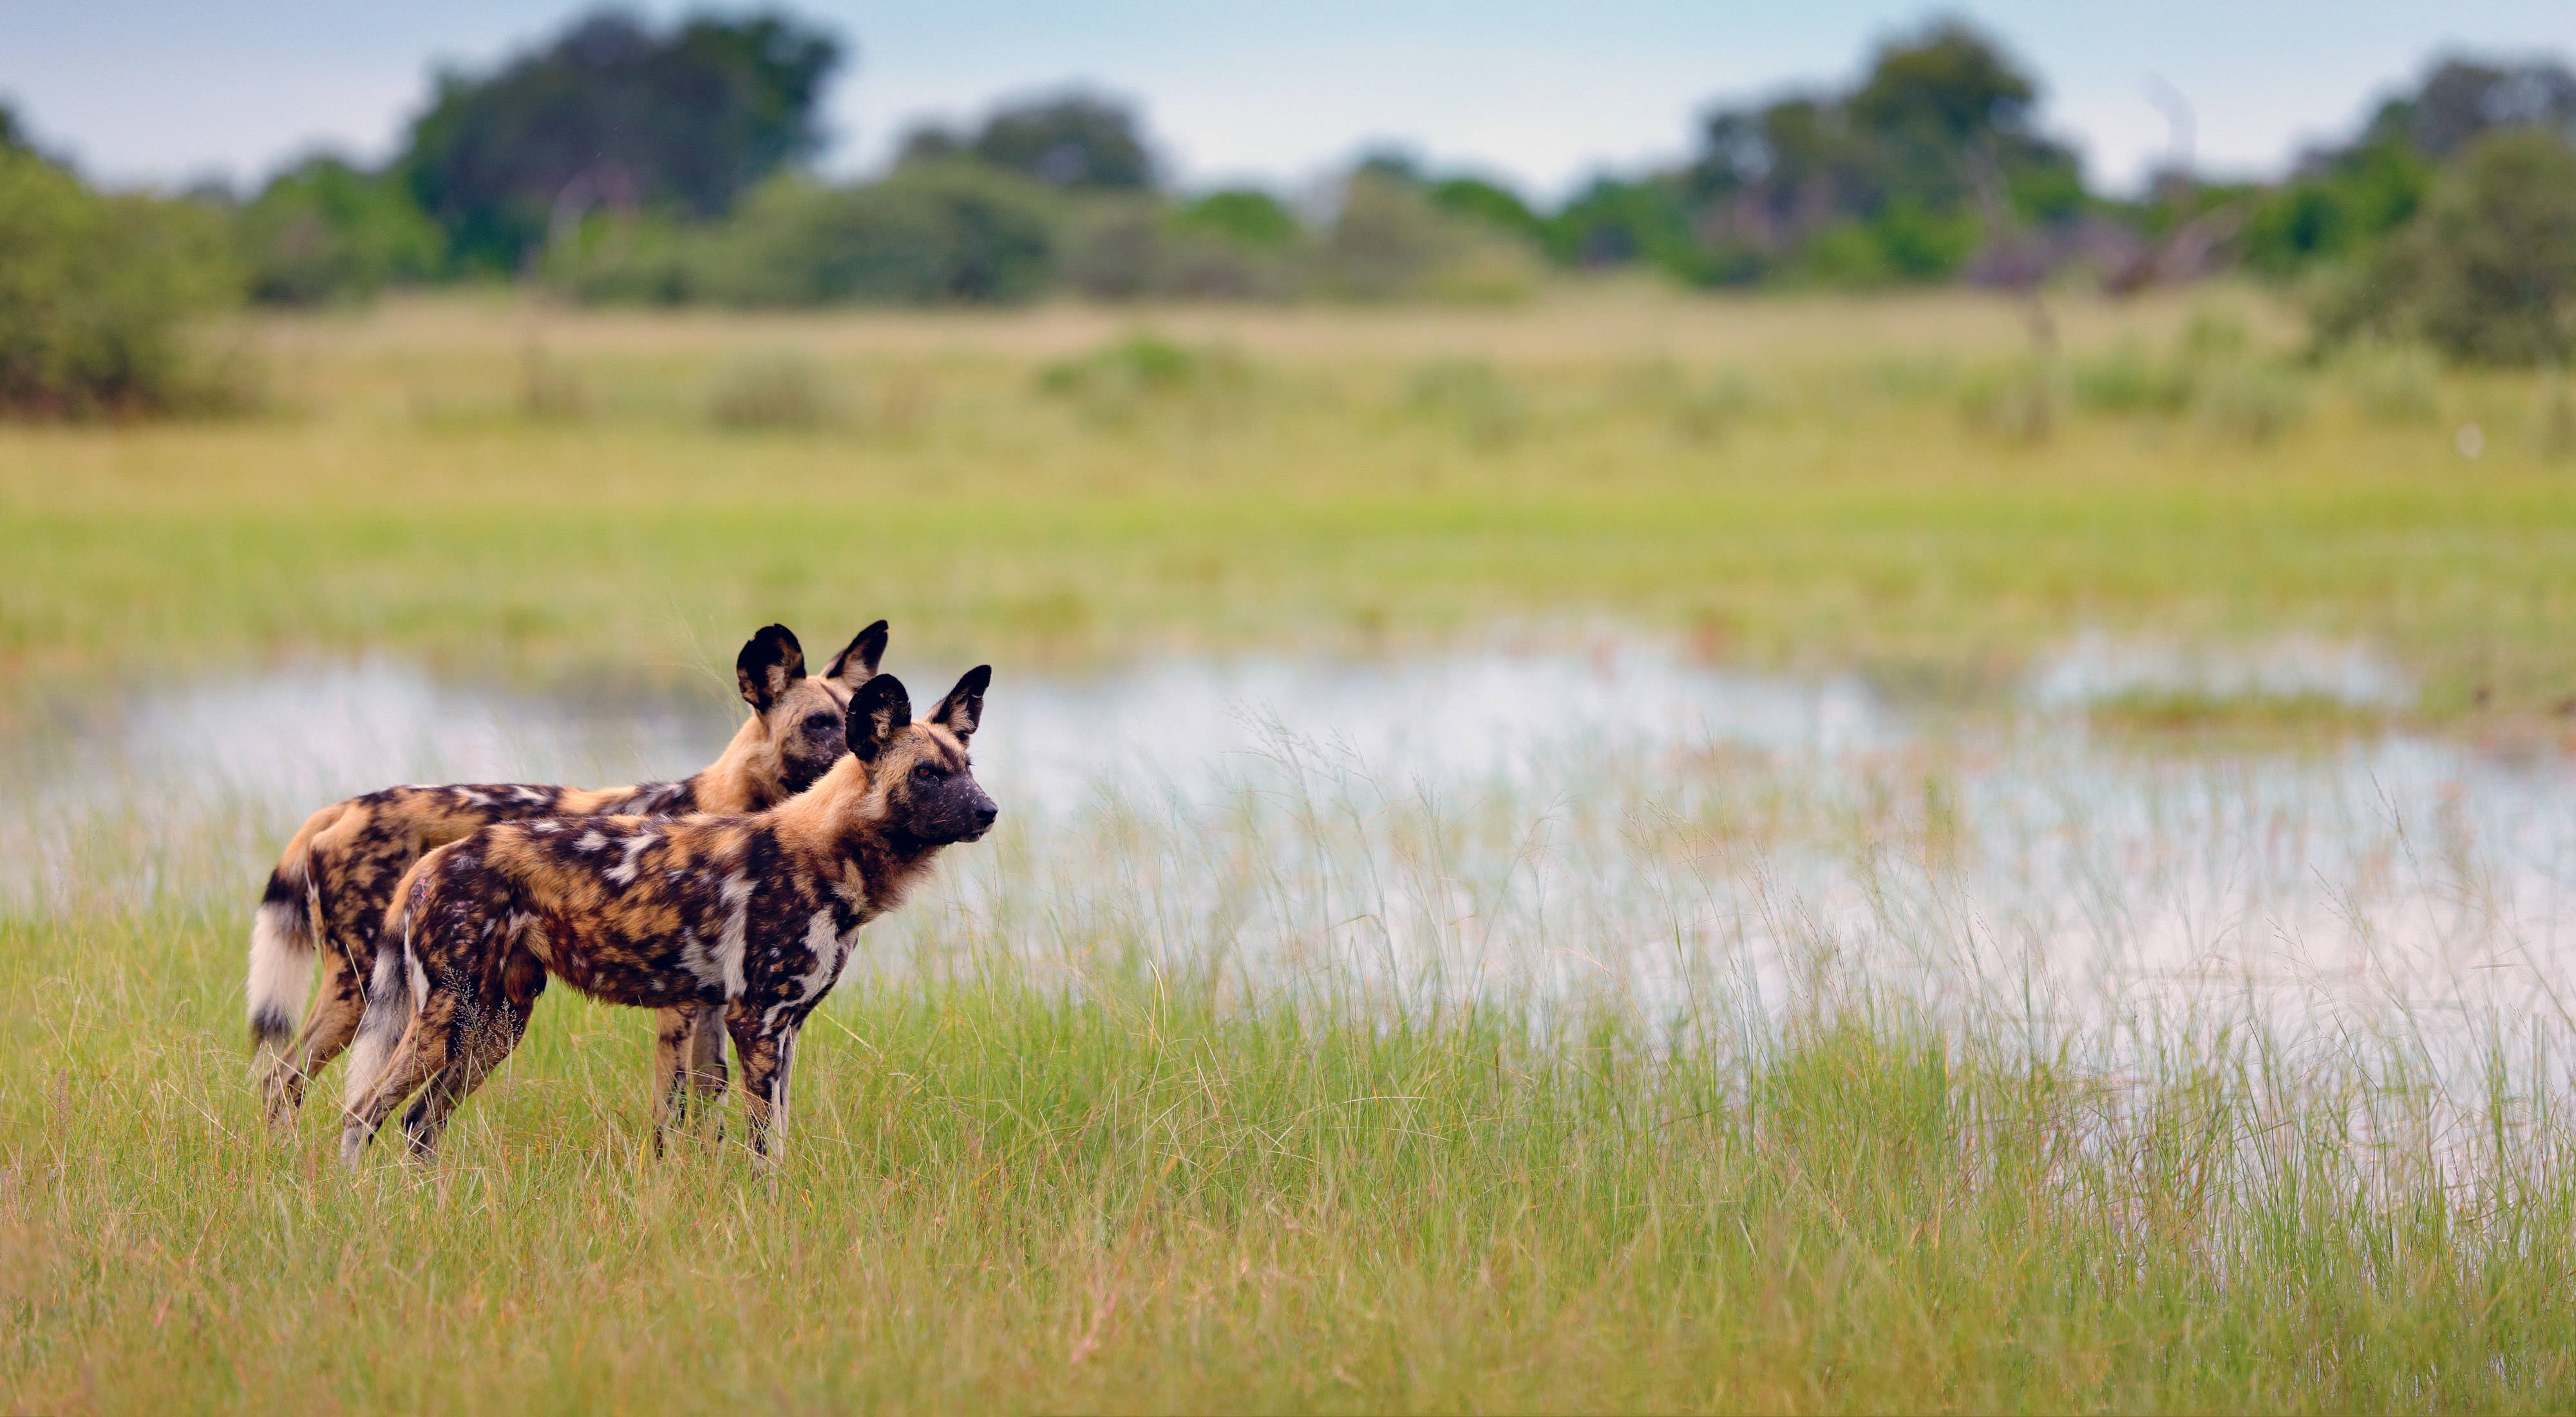 Wild dogs in swamp